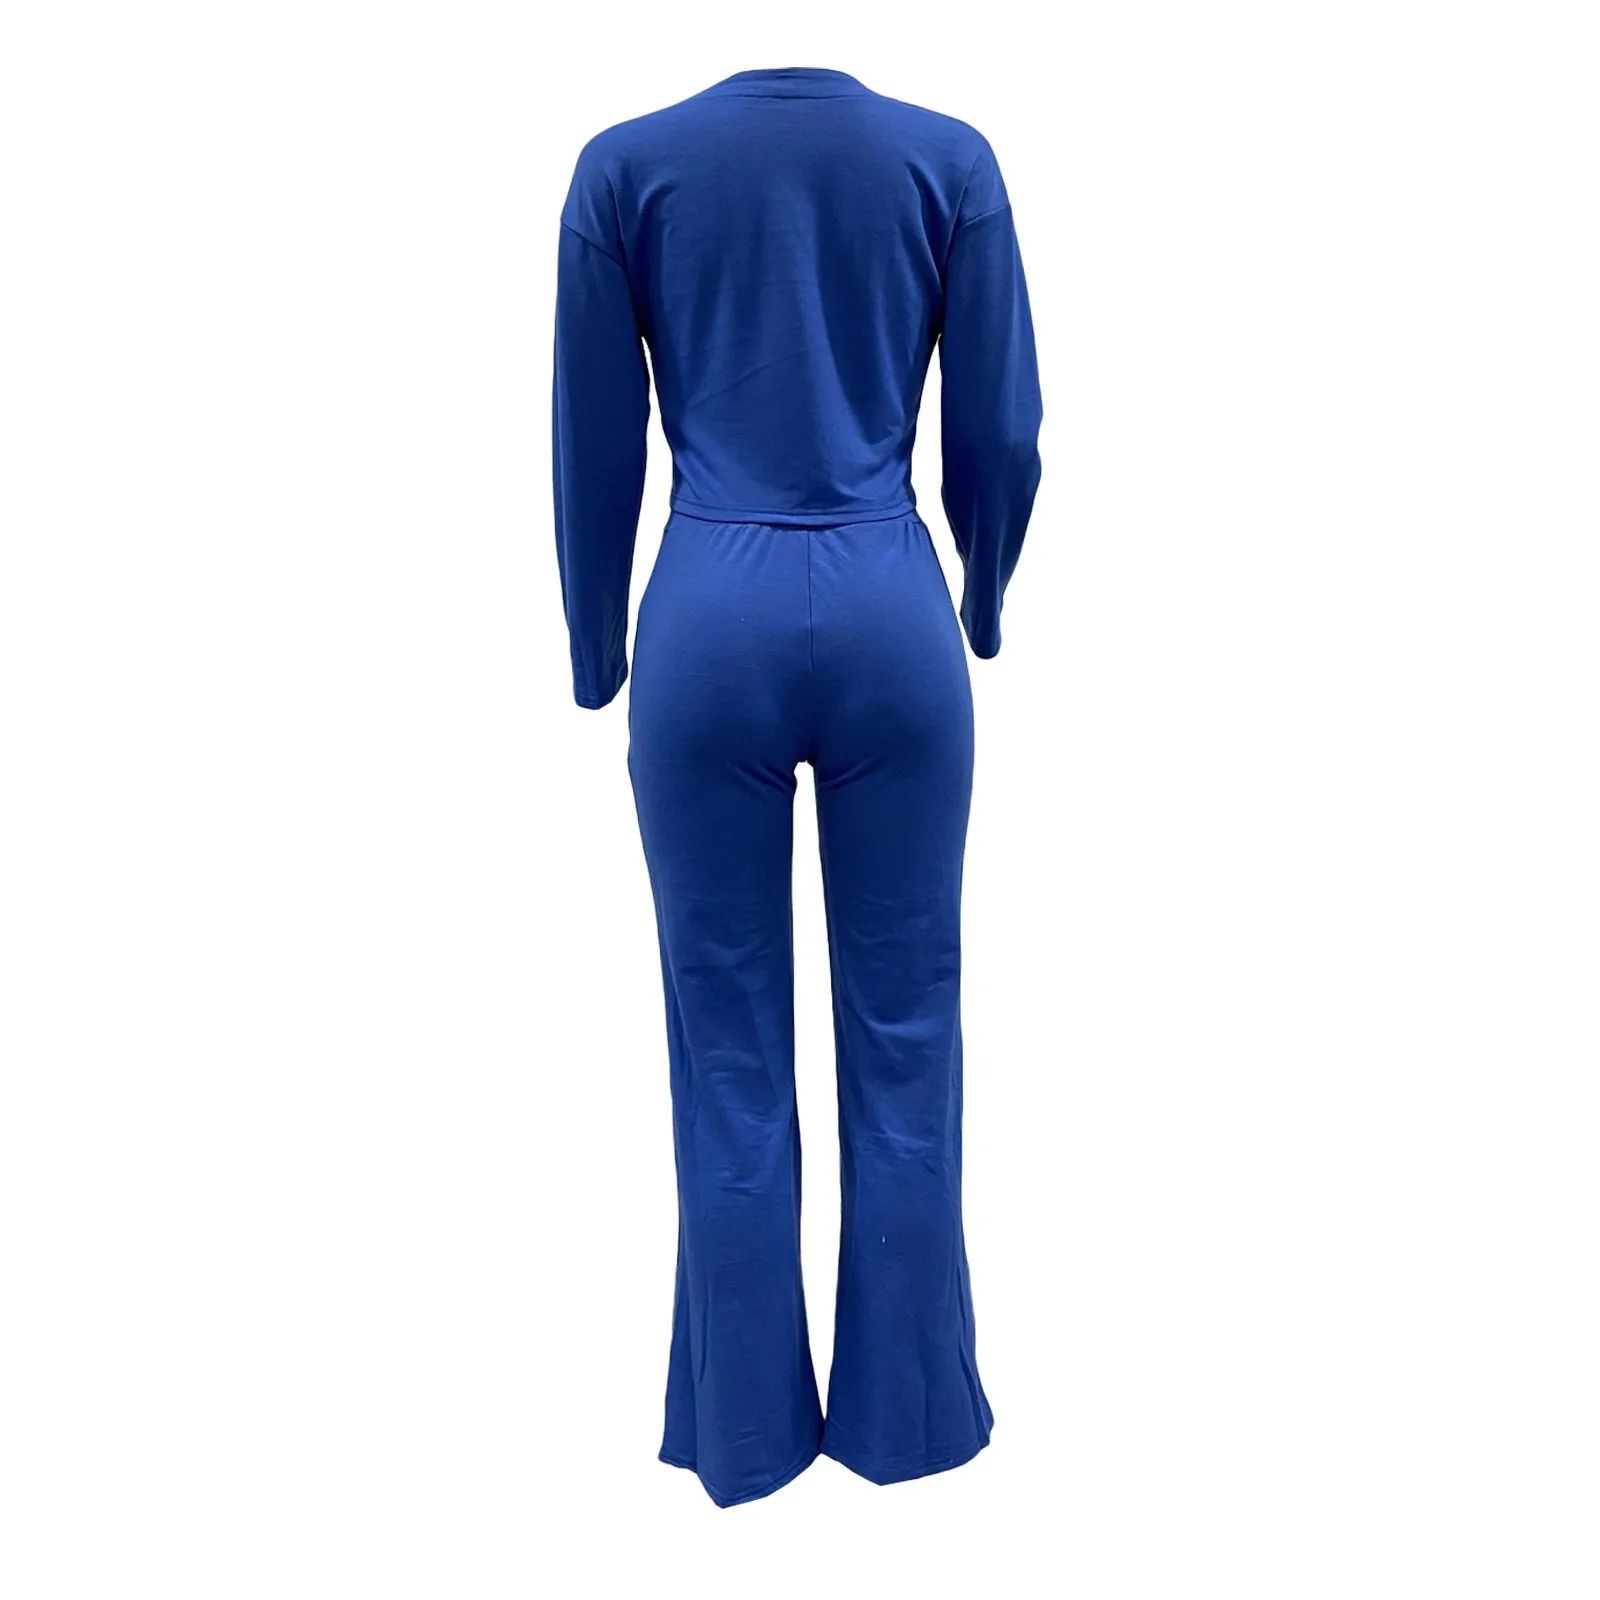 Sport Clothing Women Fashion Button Solid Color Sports Female Long Sleeve Casual Cotton Tracksuits Set 2 Piece Plus Size S-2XL